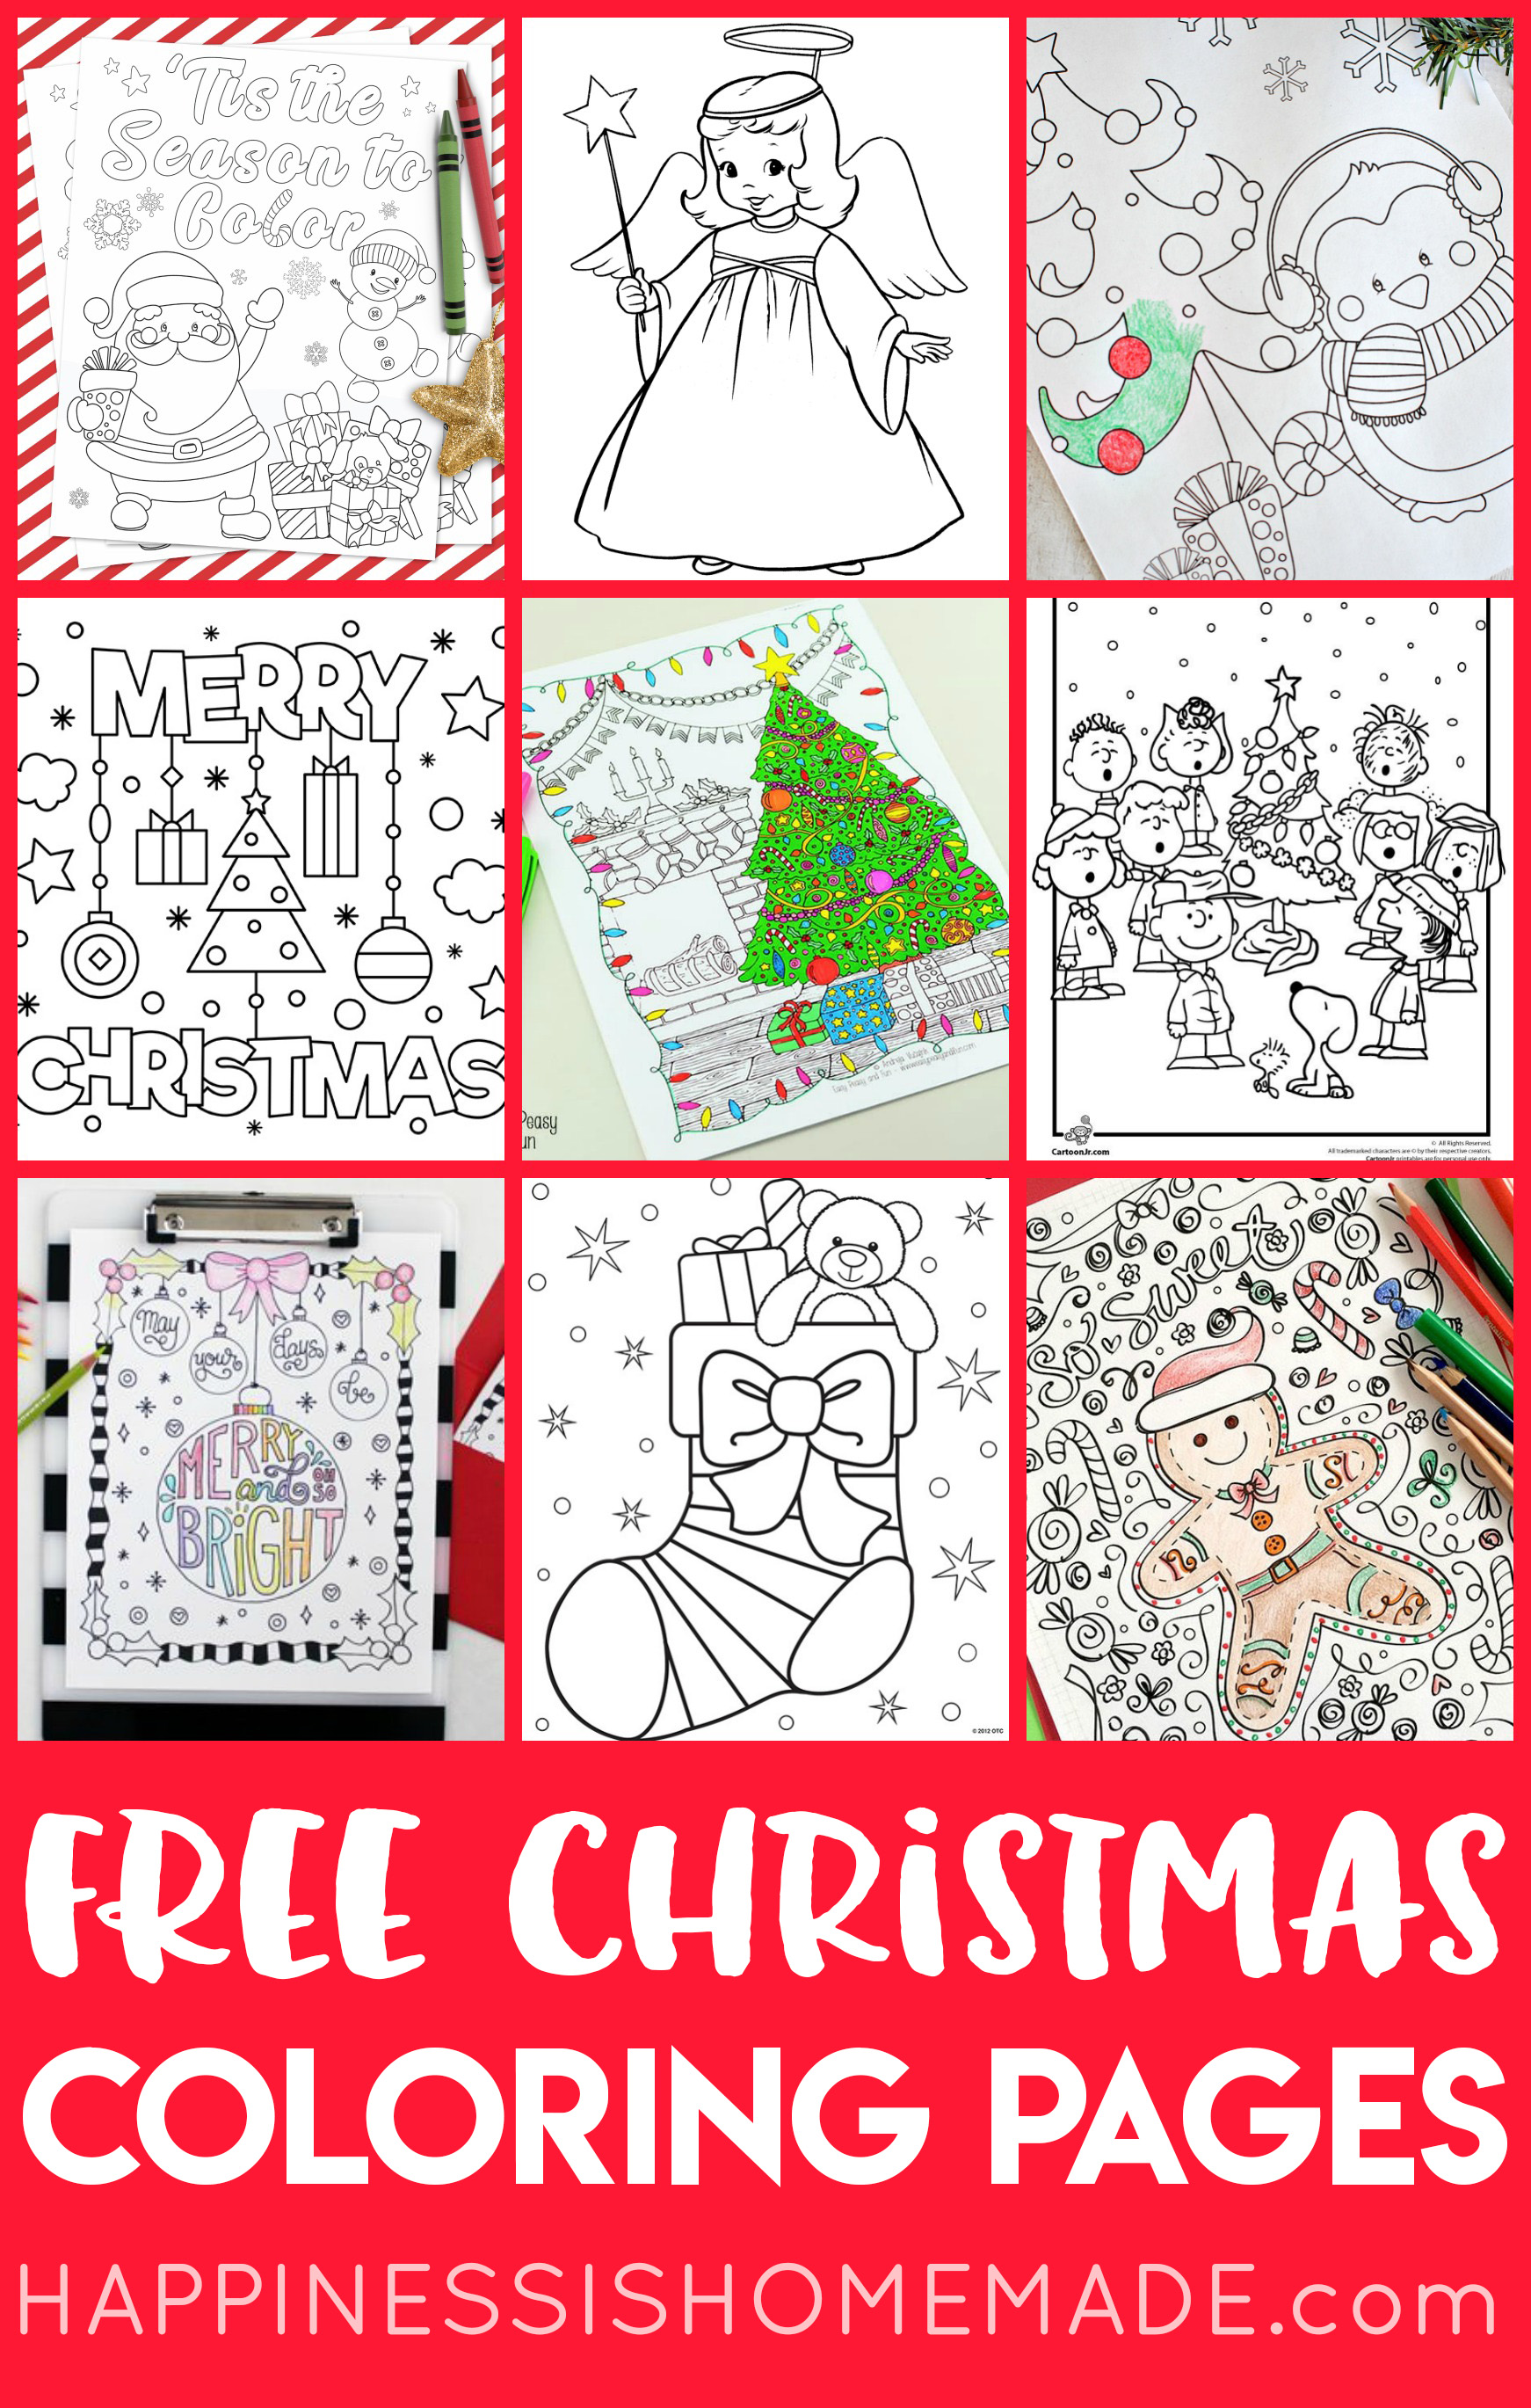 FREE Christmas Coloring Pages for Adults and Kids - Happiness is